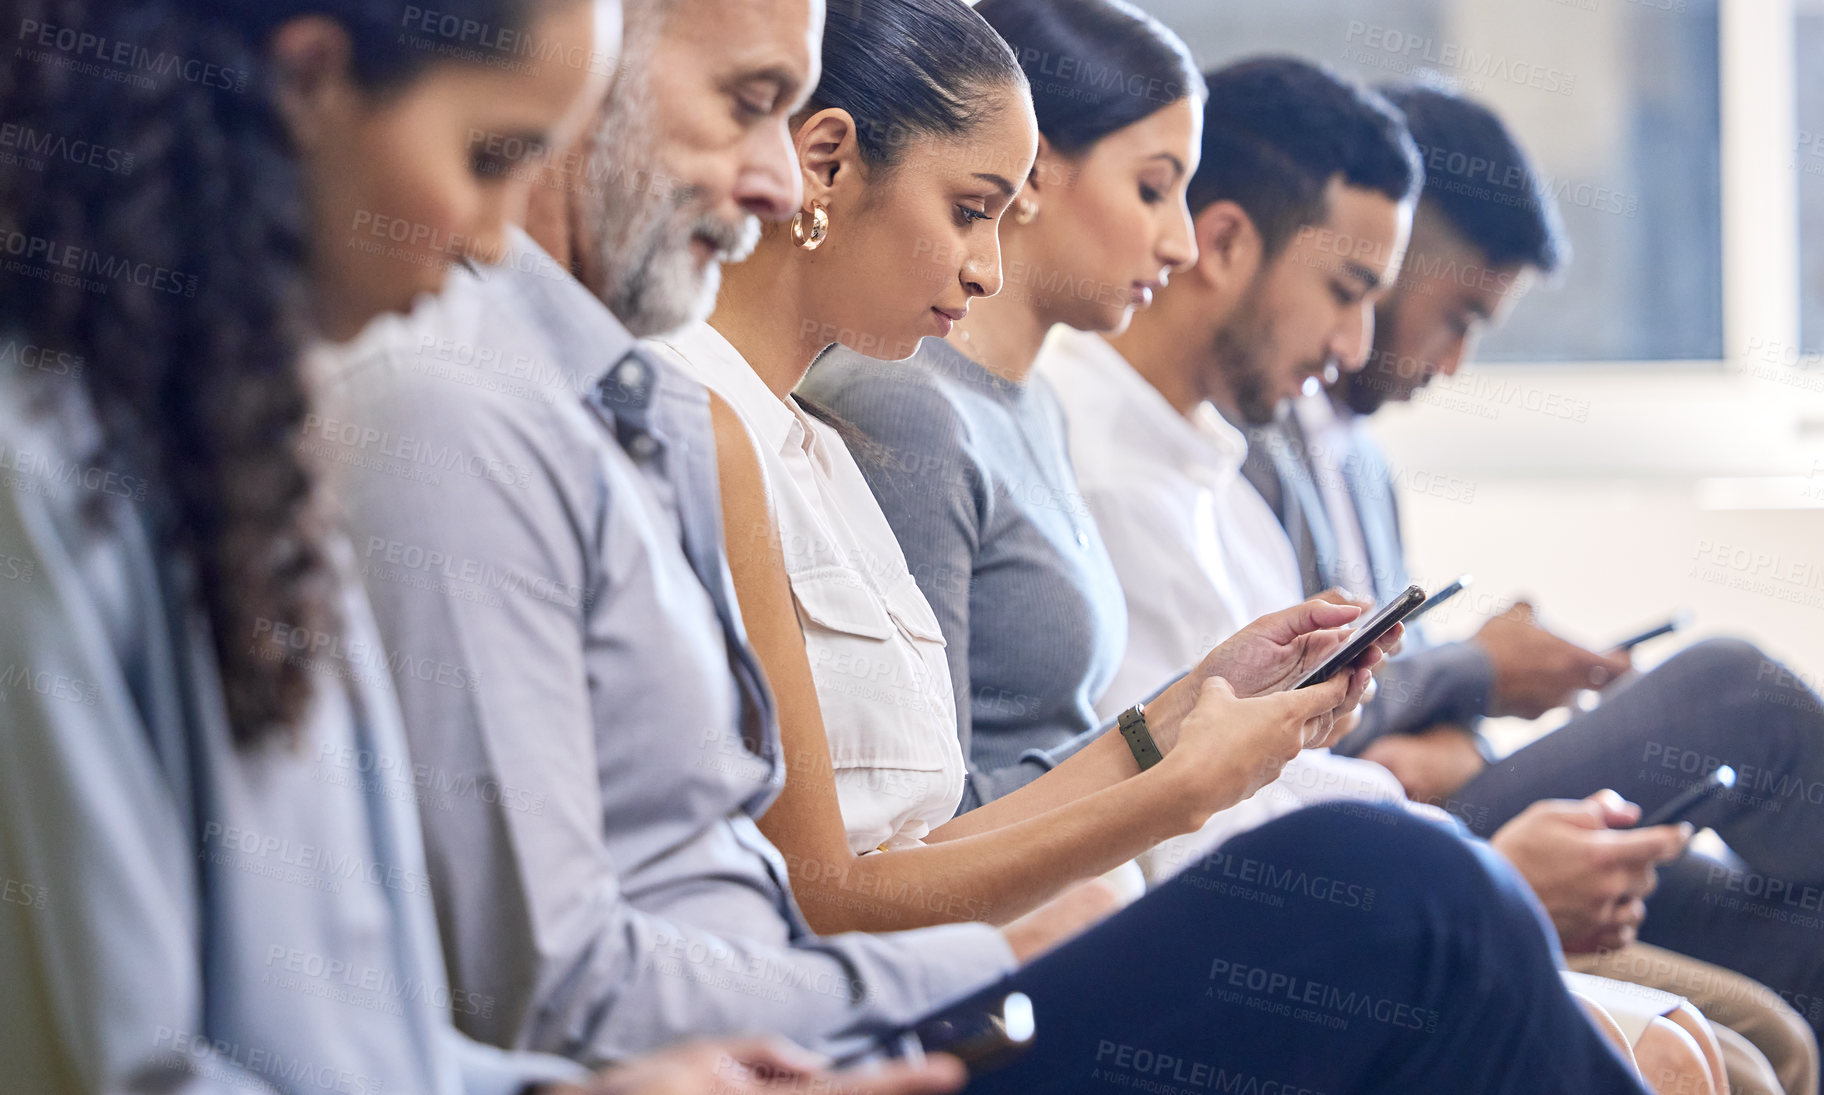 Buy stock photo Cropped shot of a group of businesspeople using their cellphones while sitting in the office during a conference